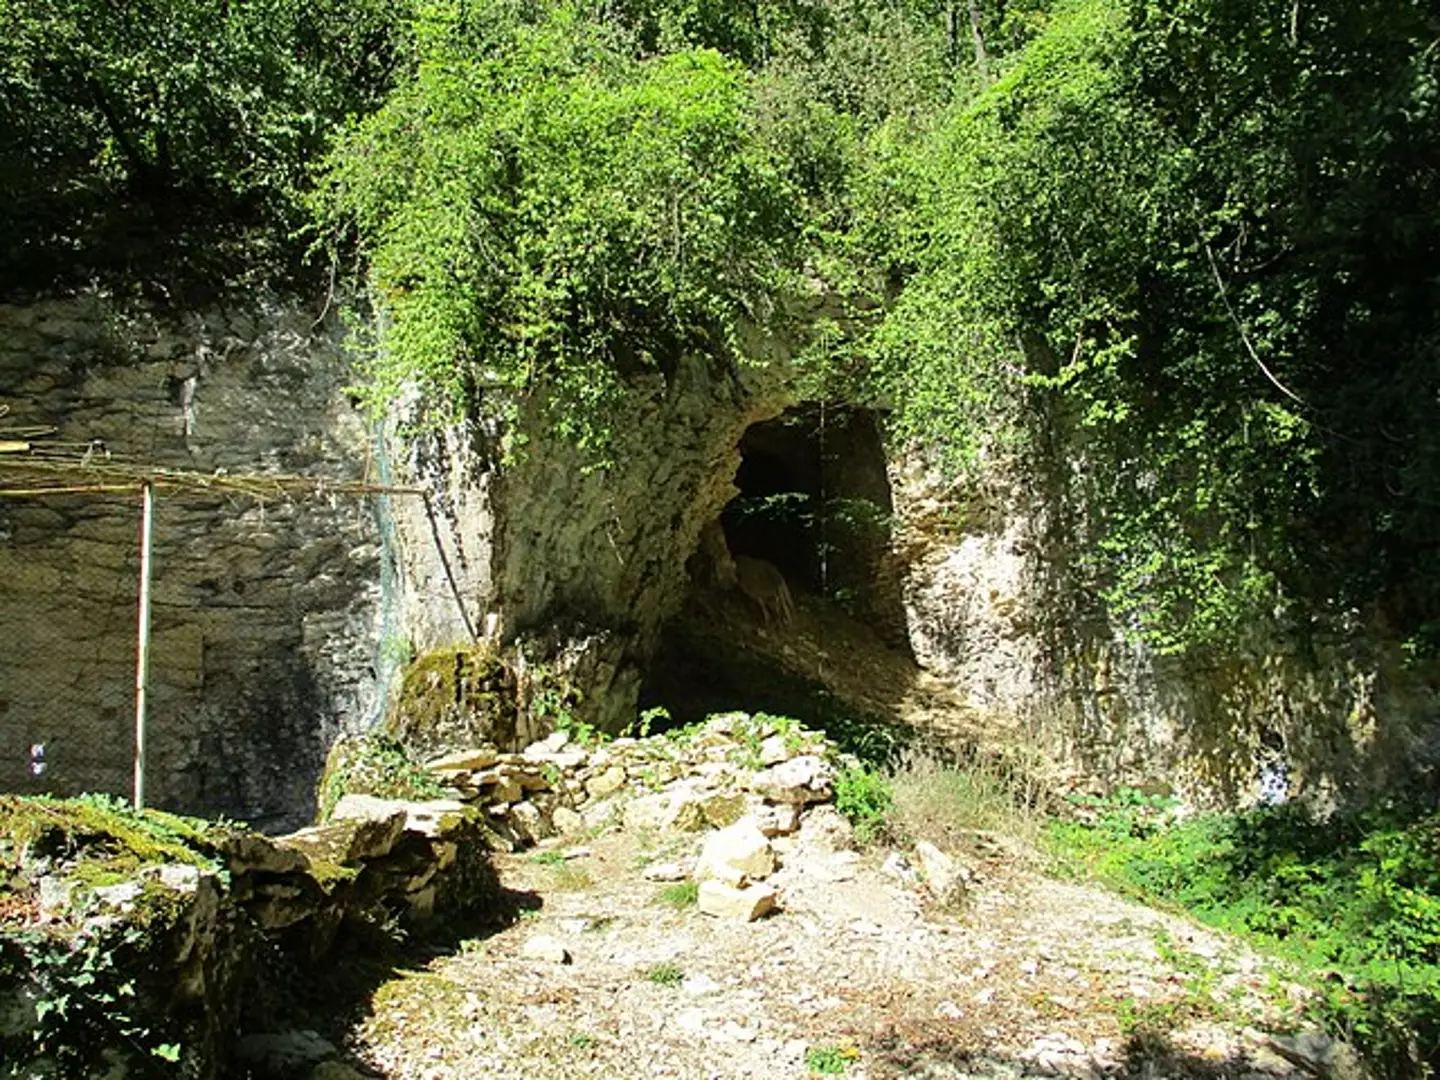 The Grotte du Renne where the bone was found.